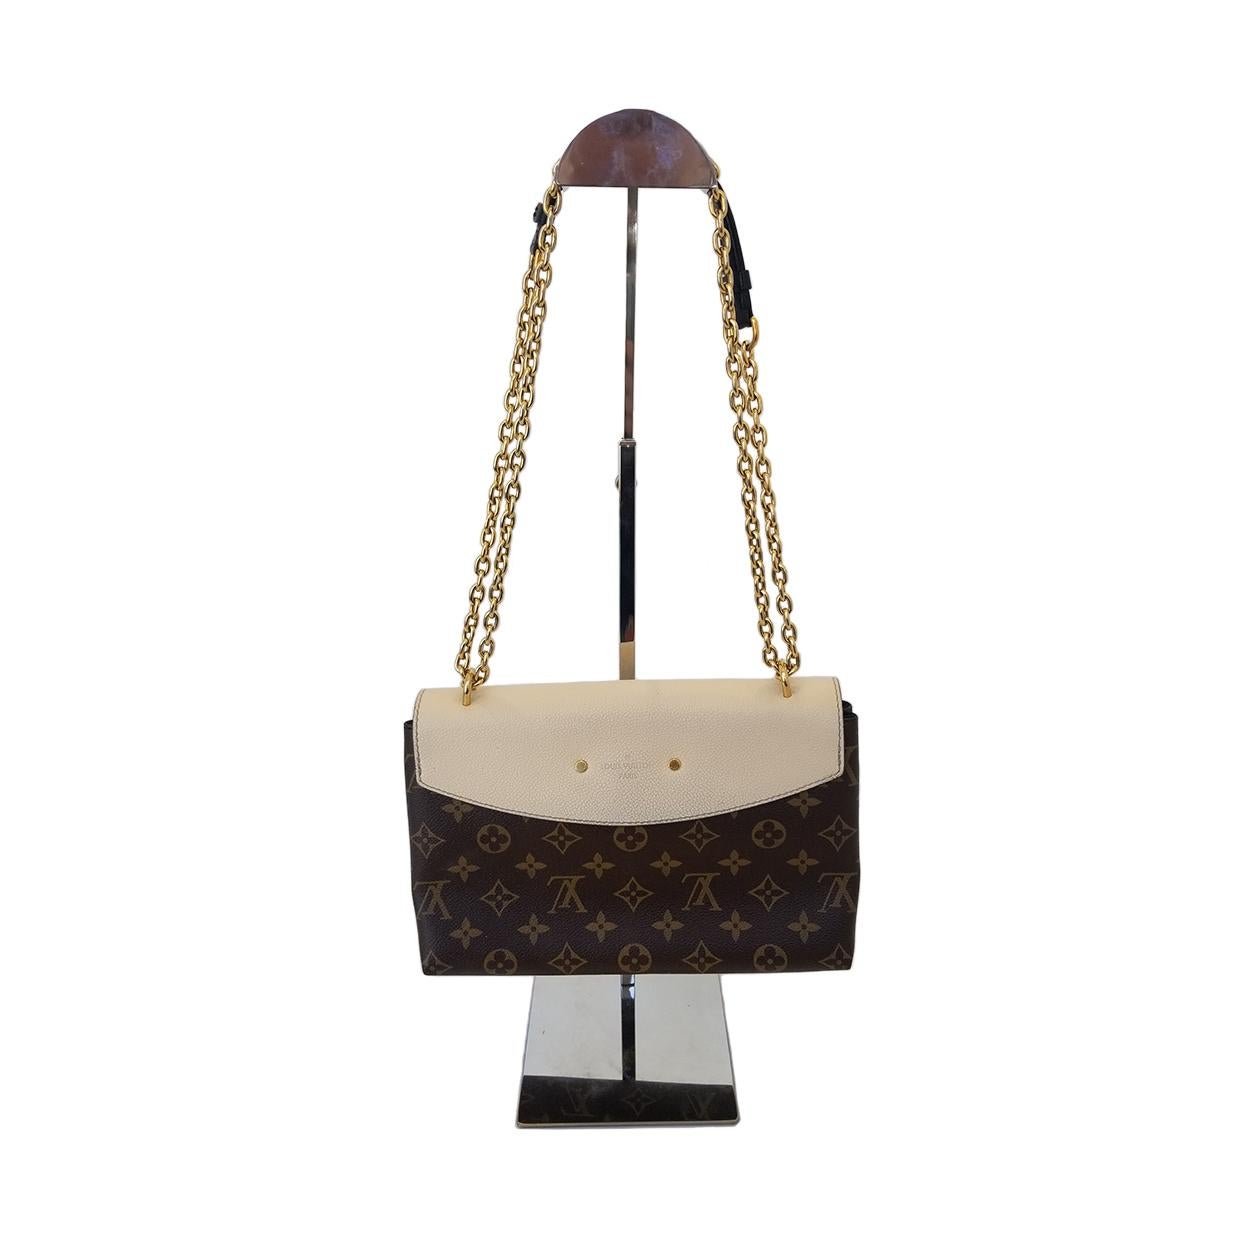 Brand - Louis Vuitton
Collection - Saint-Placide
Estimated Retail - $2,920.00
Style - Crossbody
Material - Canvas
Color - Bicolor (Beige & Brown)
Pattern - Monogram
Closure - Magnetic
Hardware Material - Goldtone
Model/Date Code - CA1158
Comes With